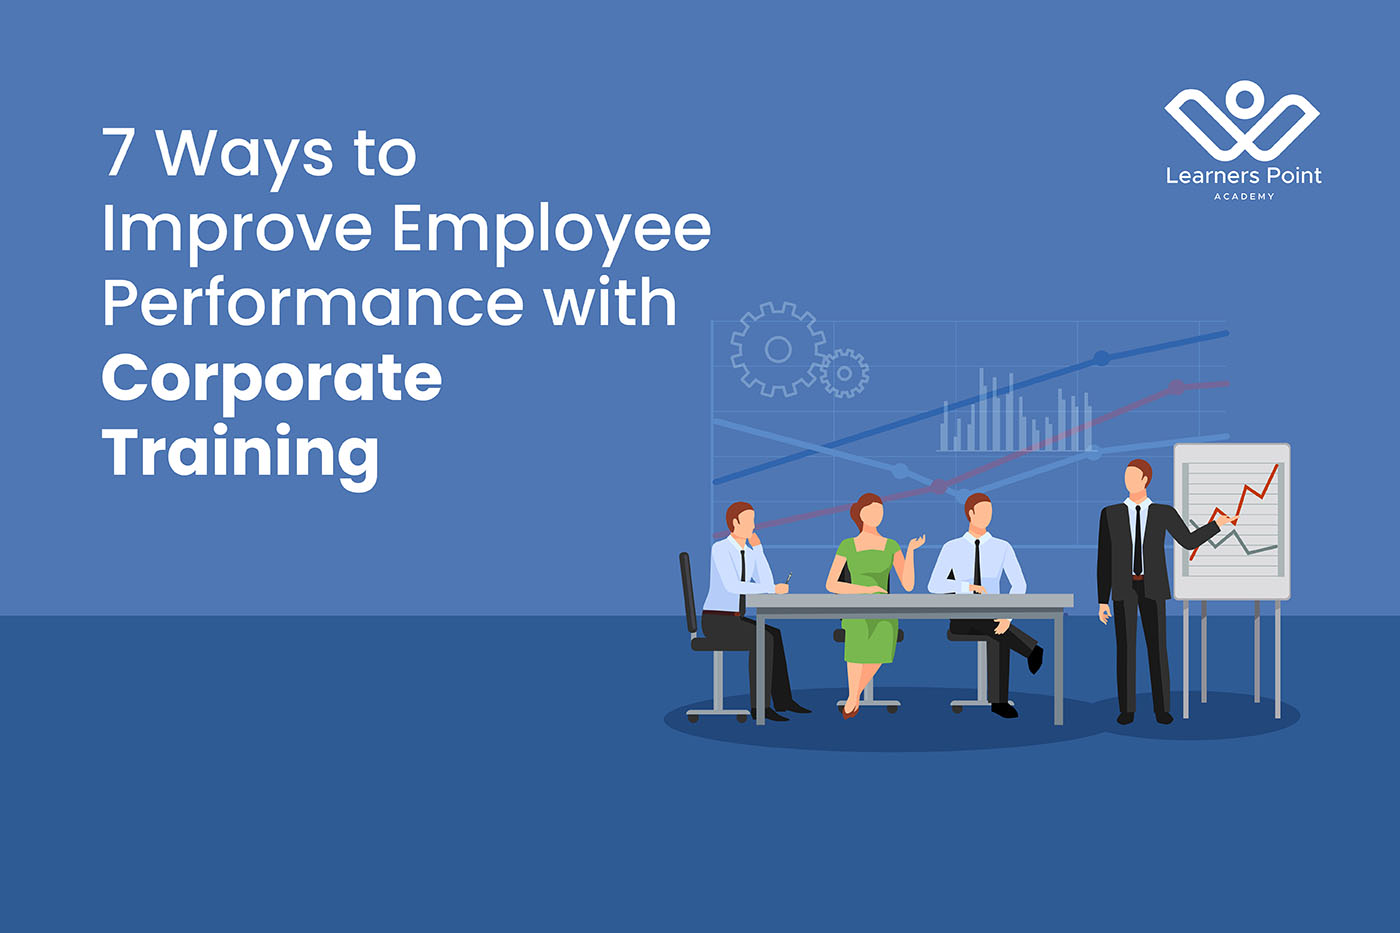 7 Ways to Improve Employee Performance with Corporate Training